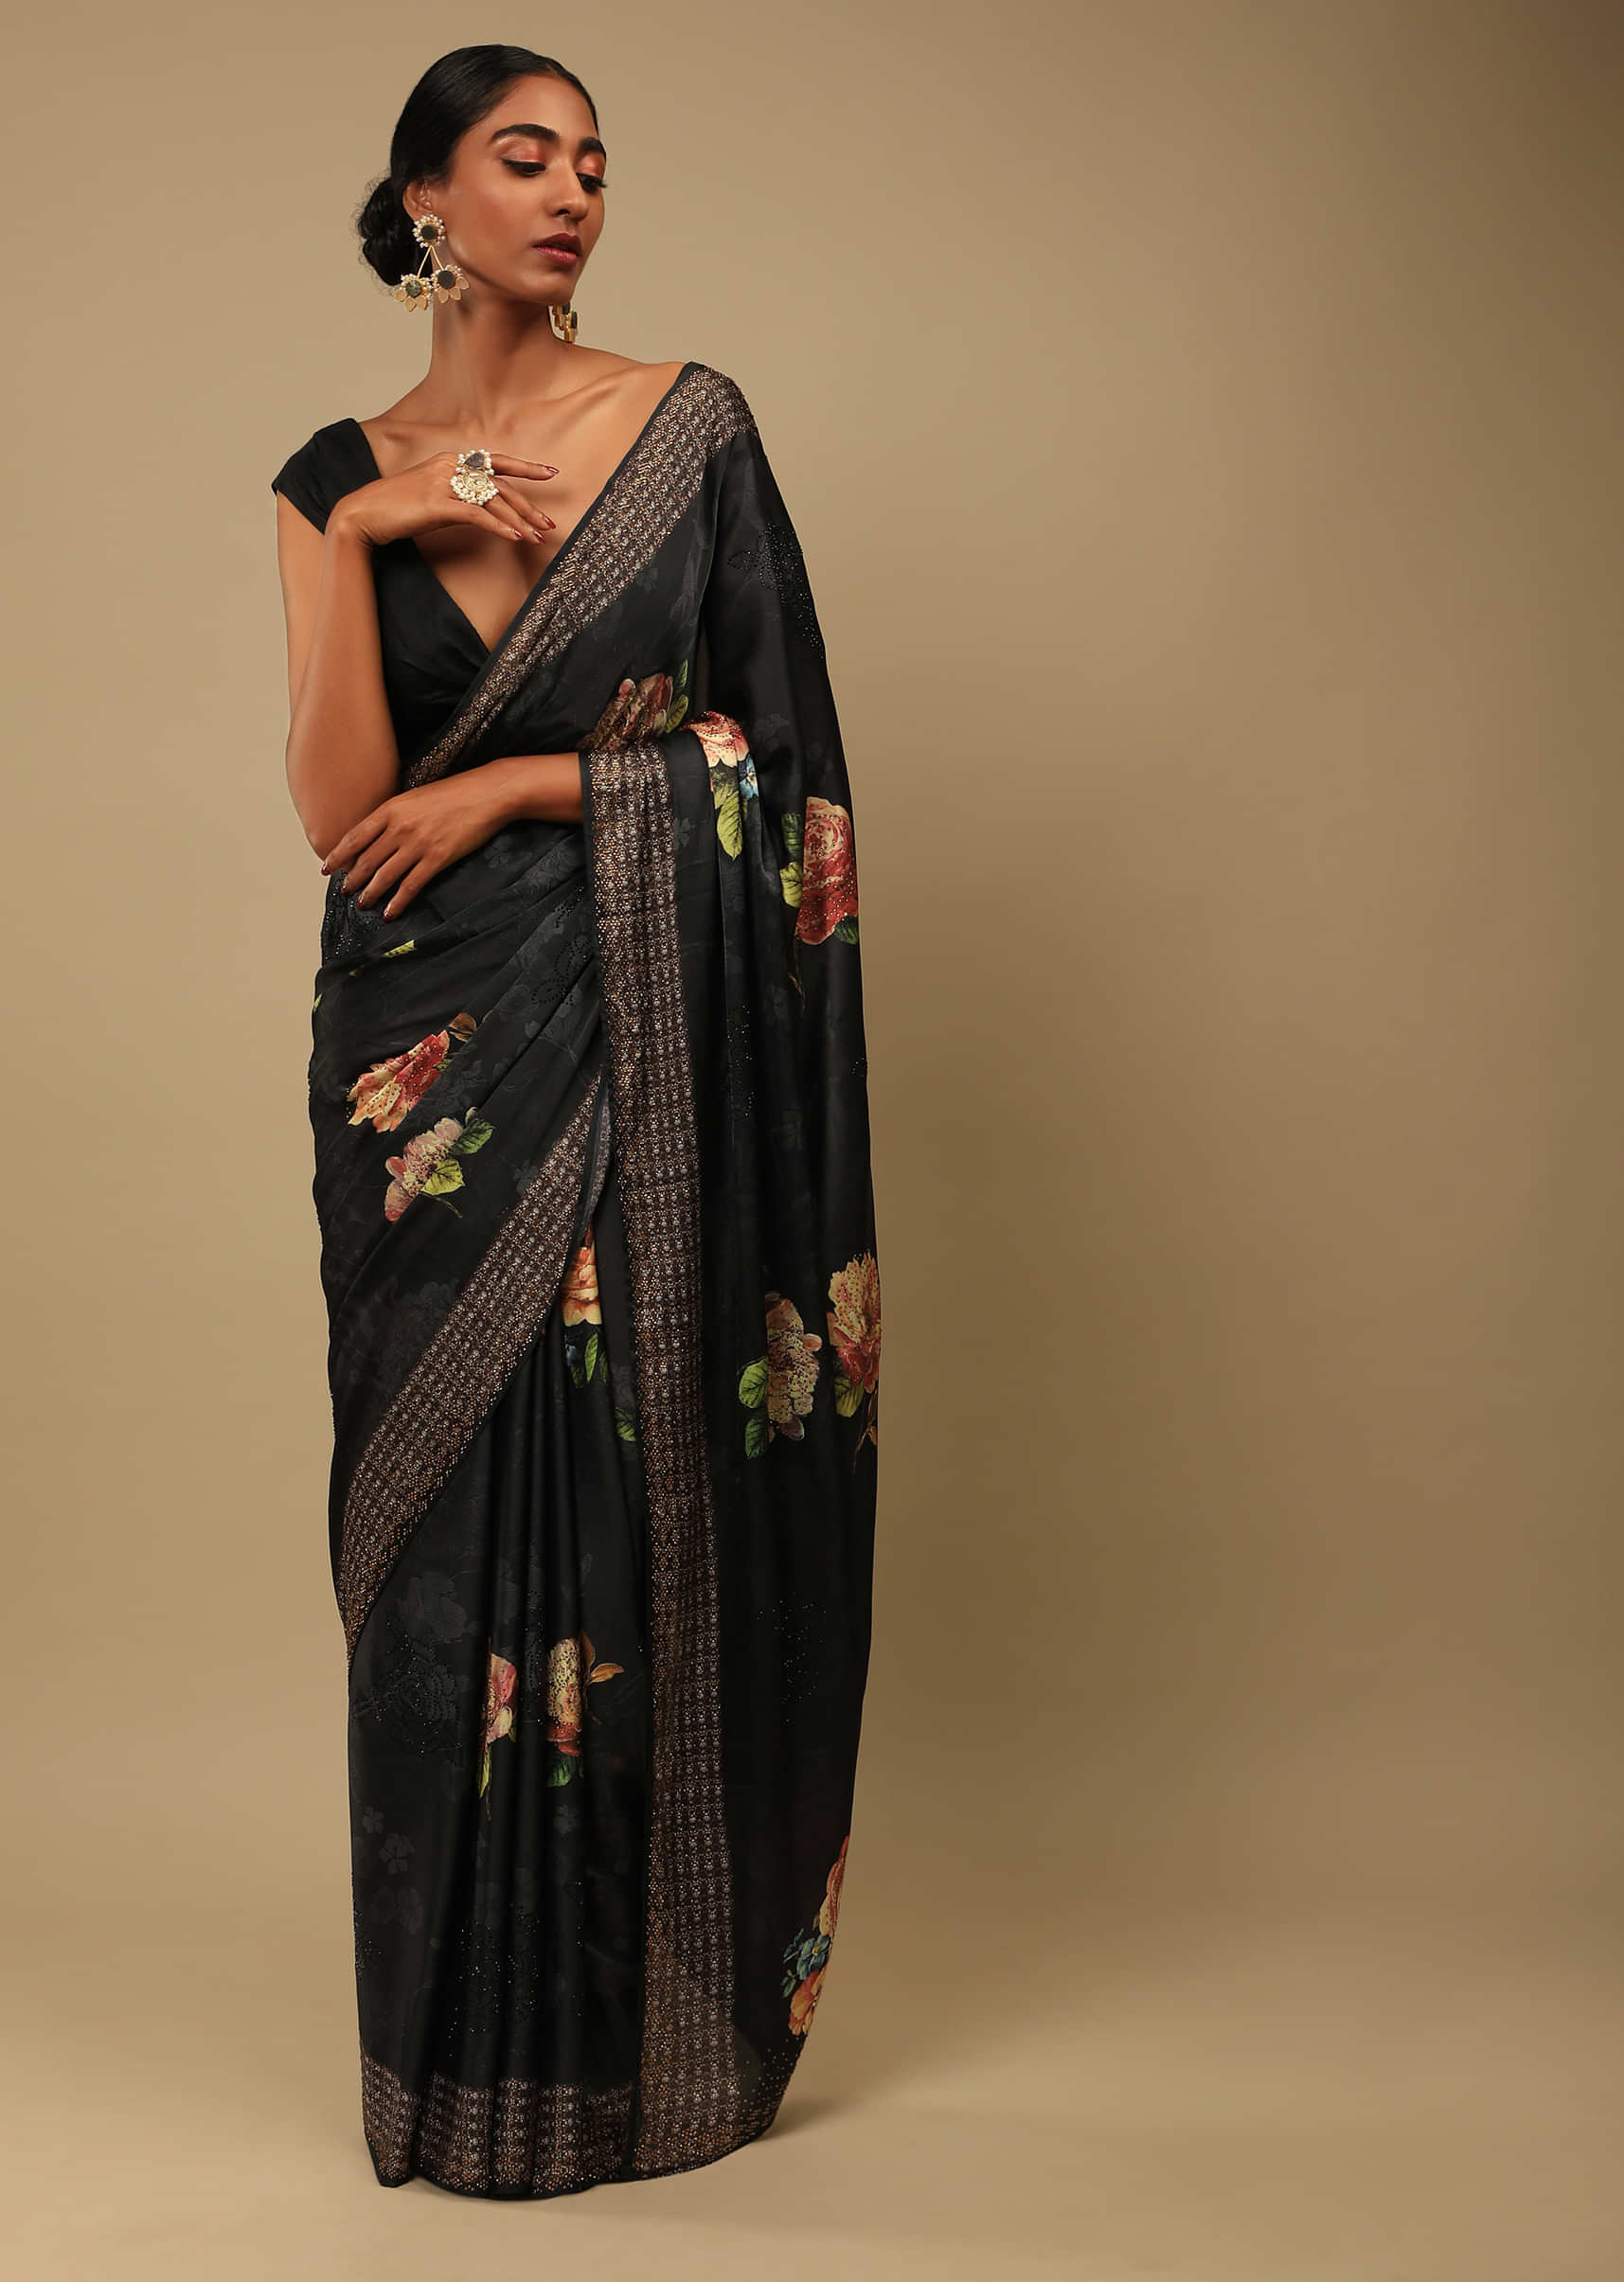 Ash Black Saree In Satin Crepe With Rose Print And Kundan Detailed Border Along With Unstitched Blouse  